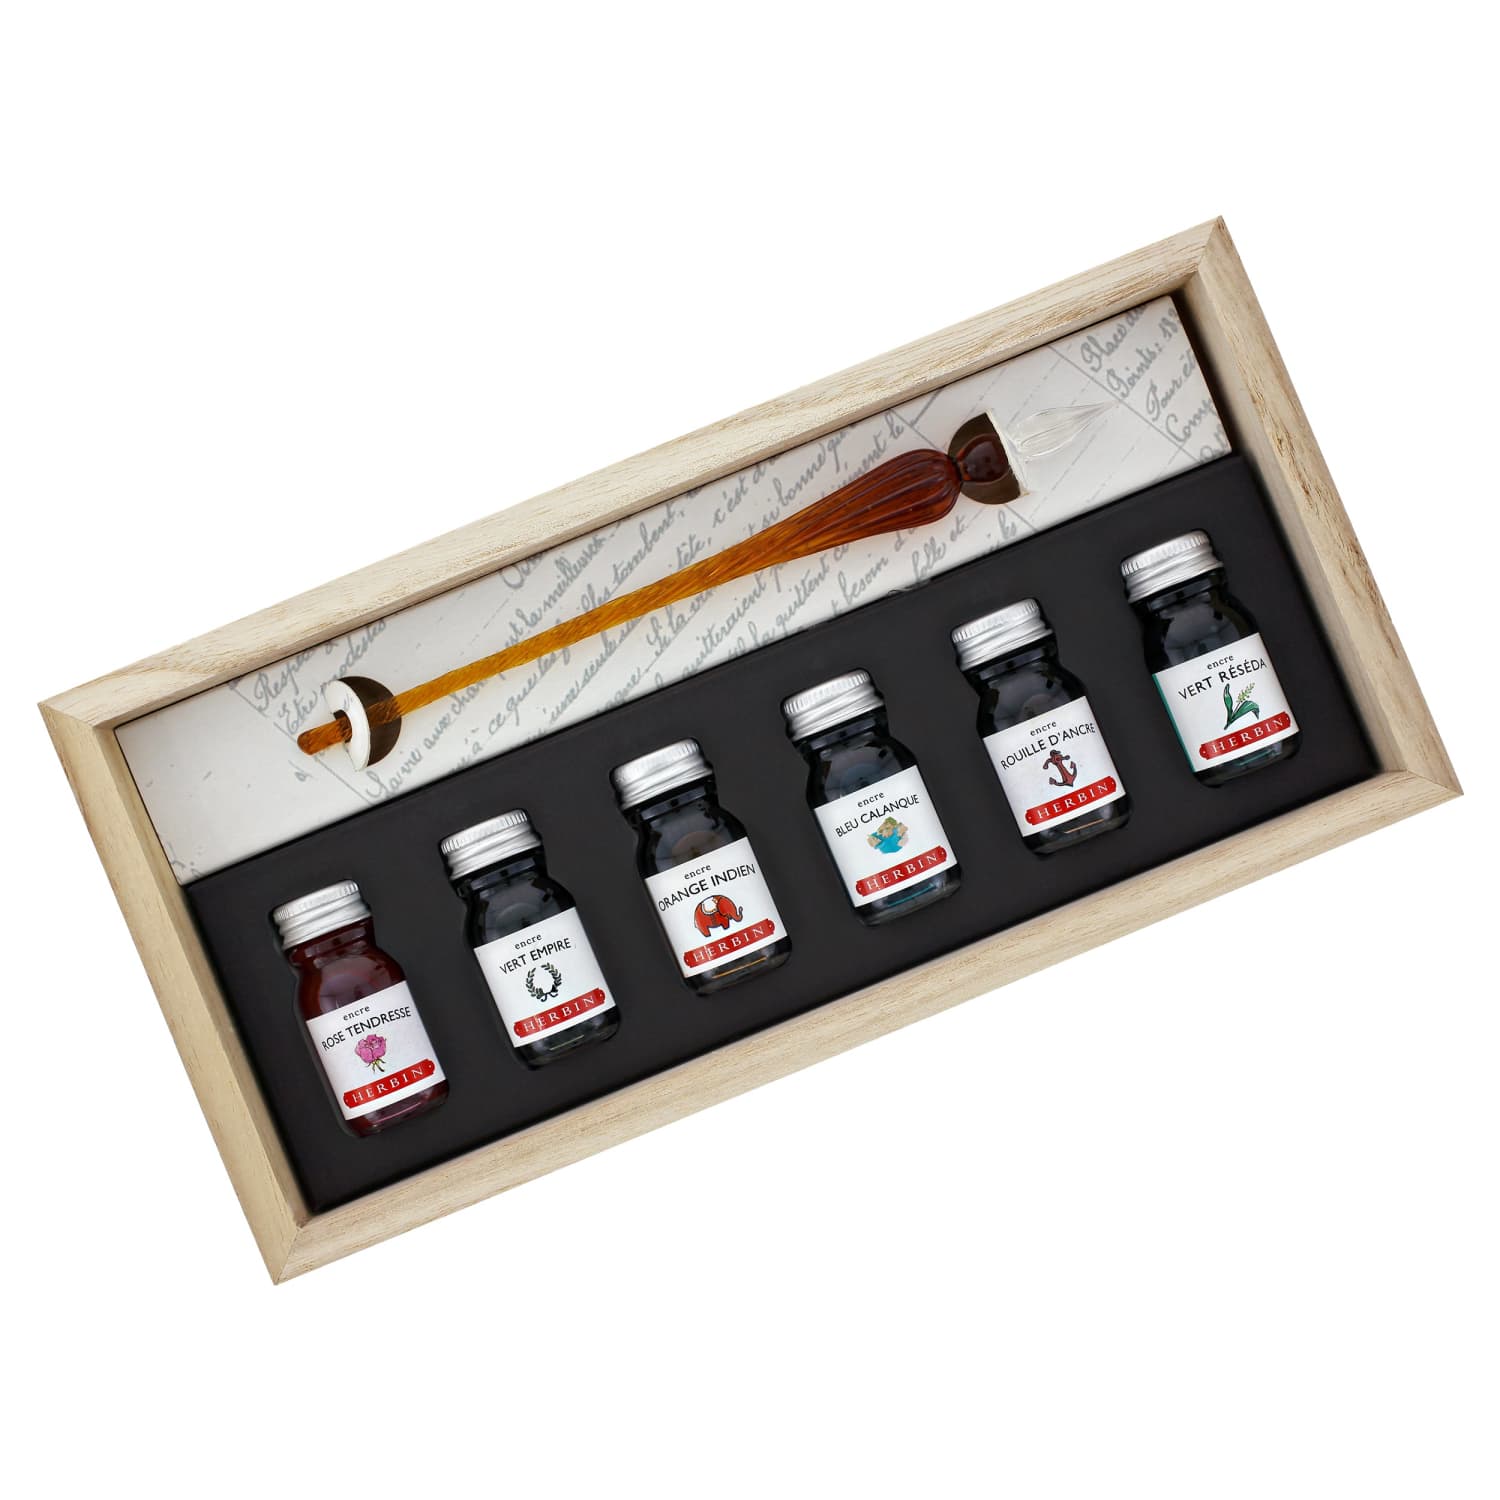 J. Herbin Round Glass Pen and Ink Set in Rose